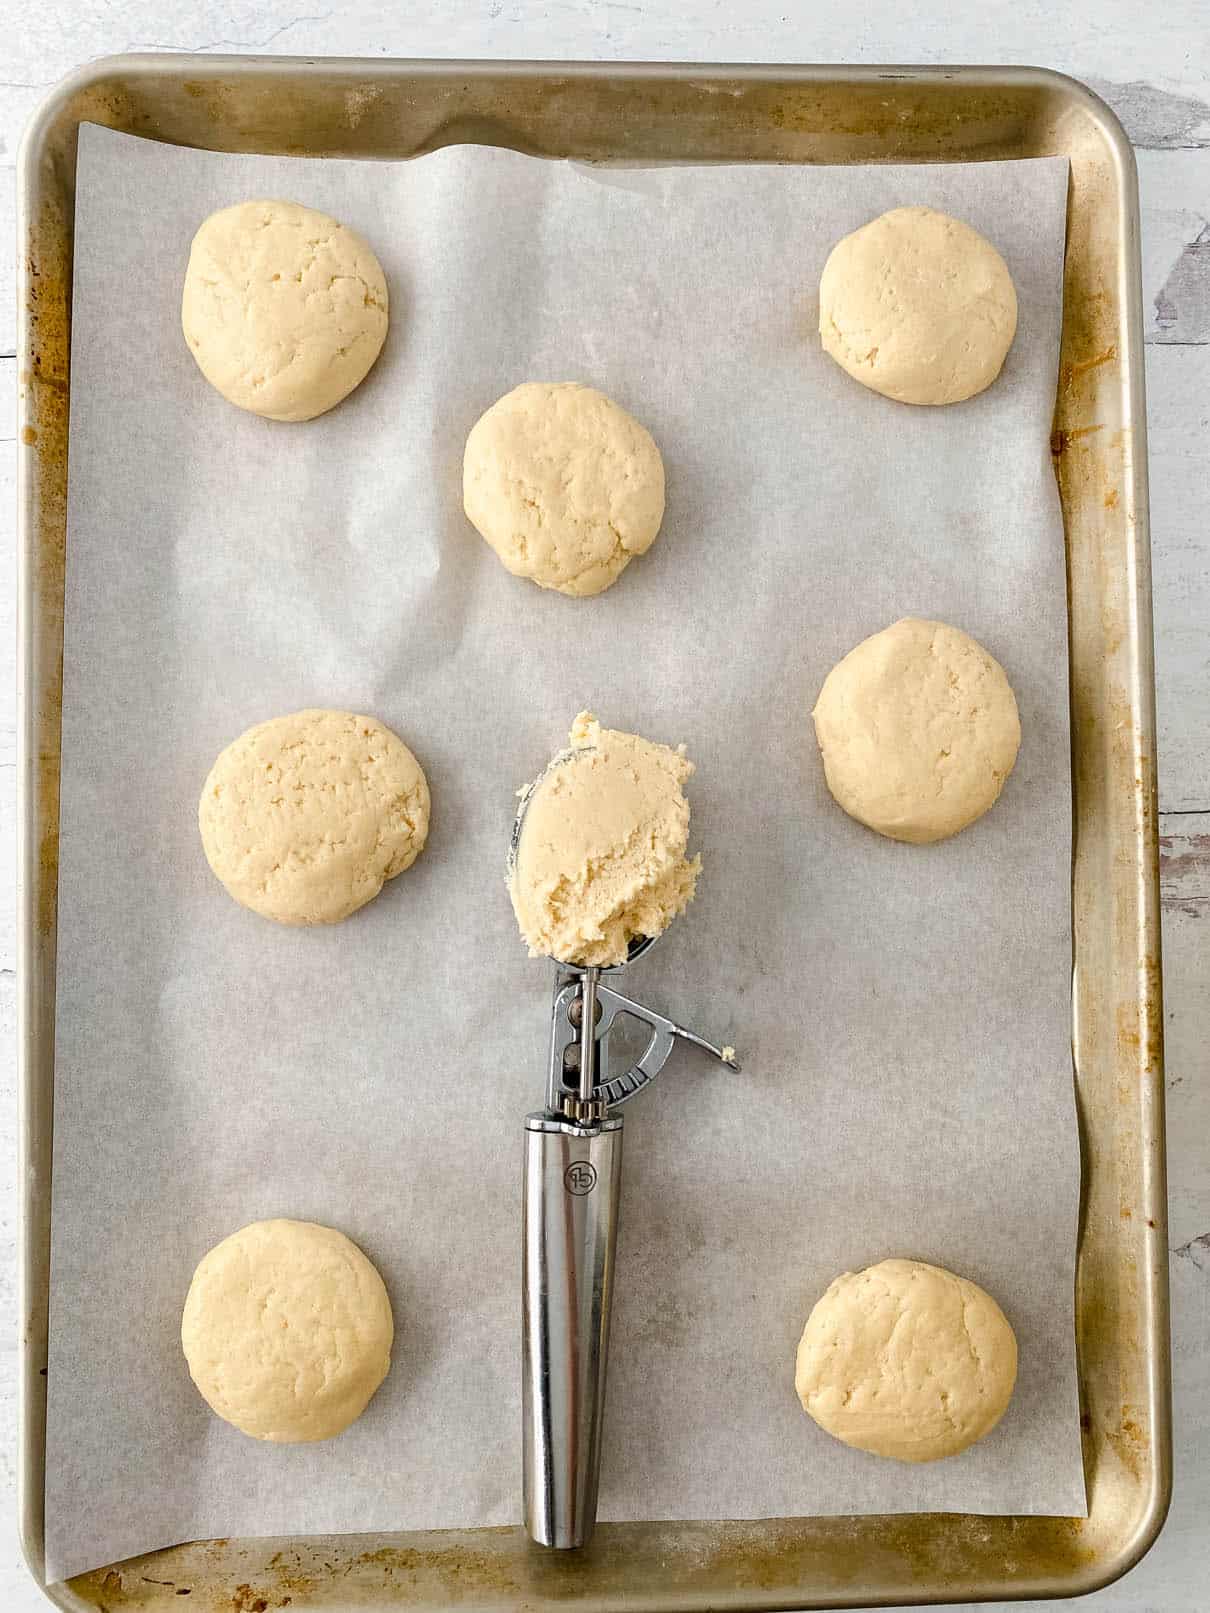 Scooping out cookie batter onto a parchment-lined baking sheet